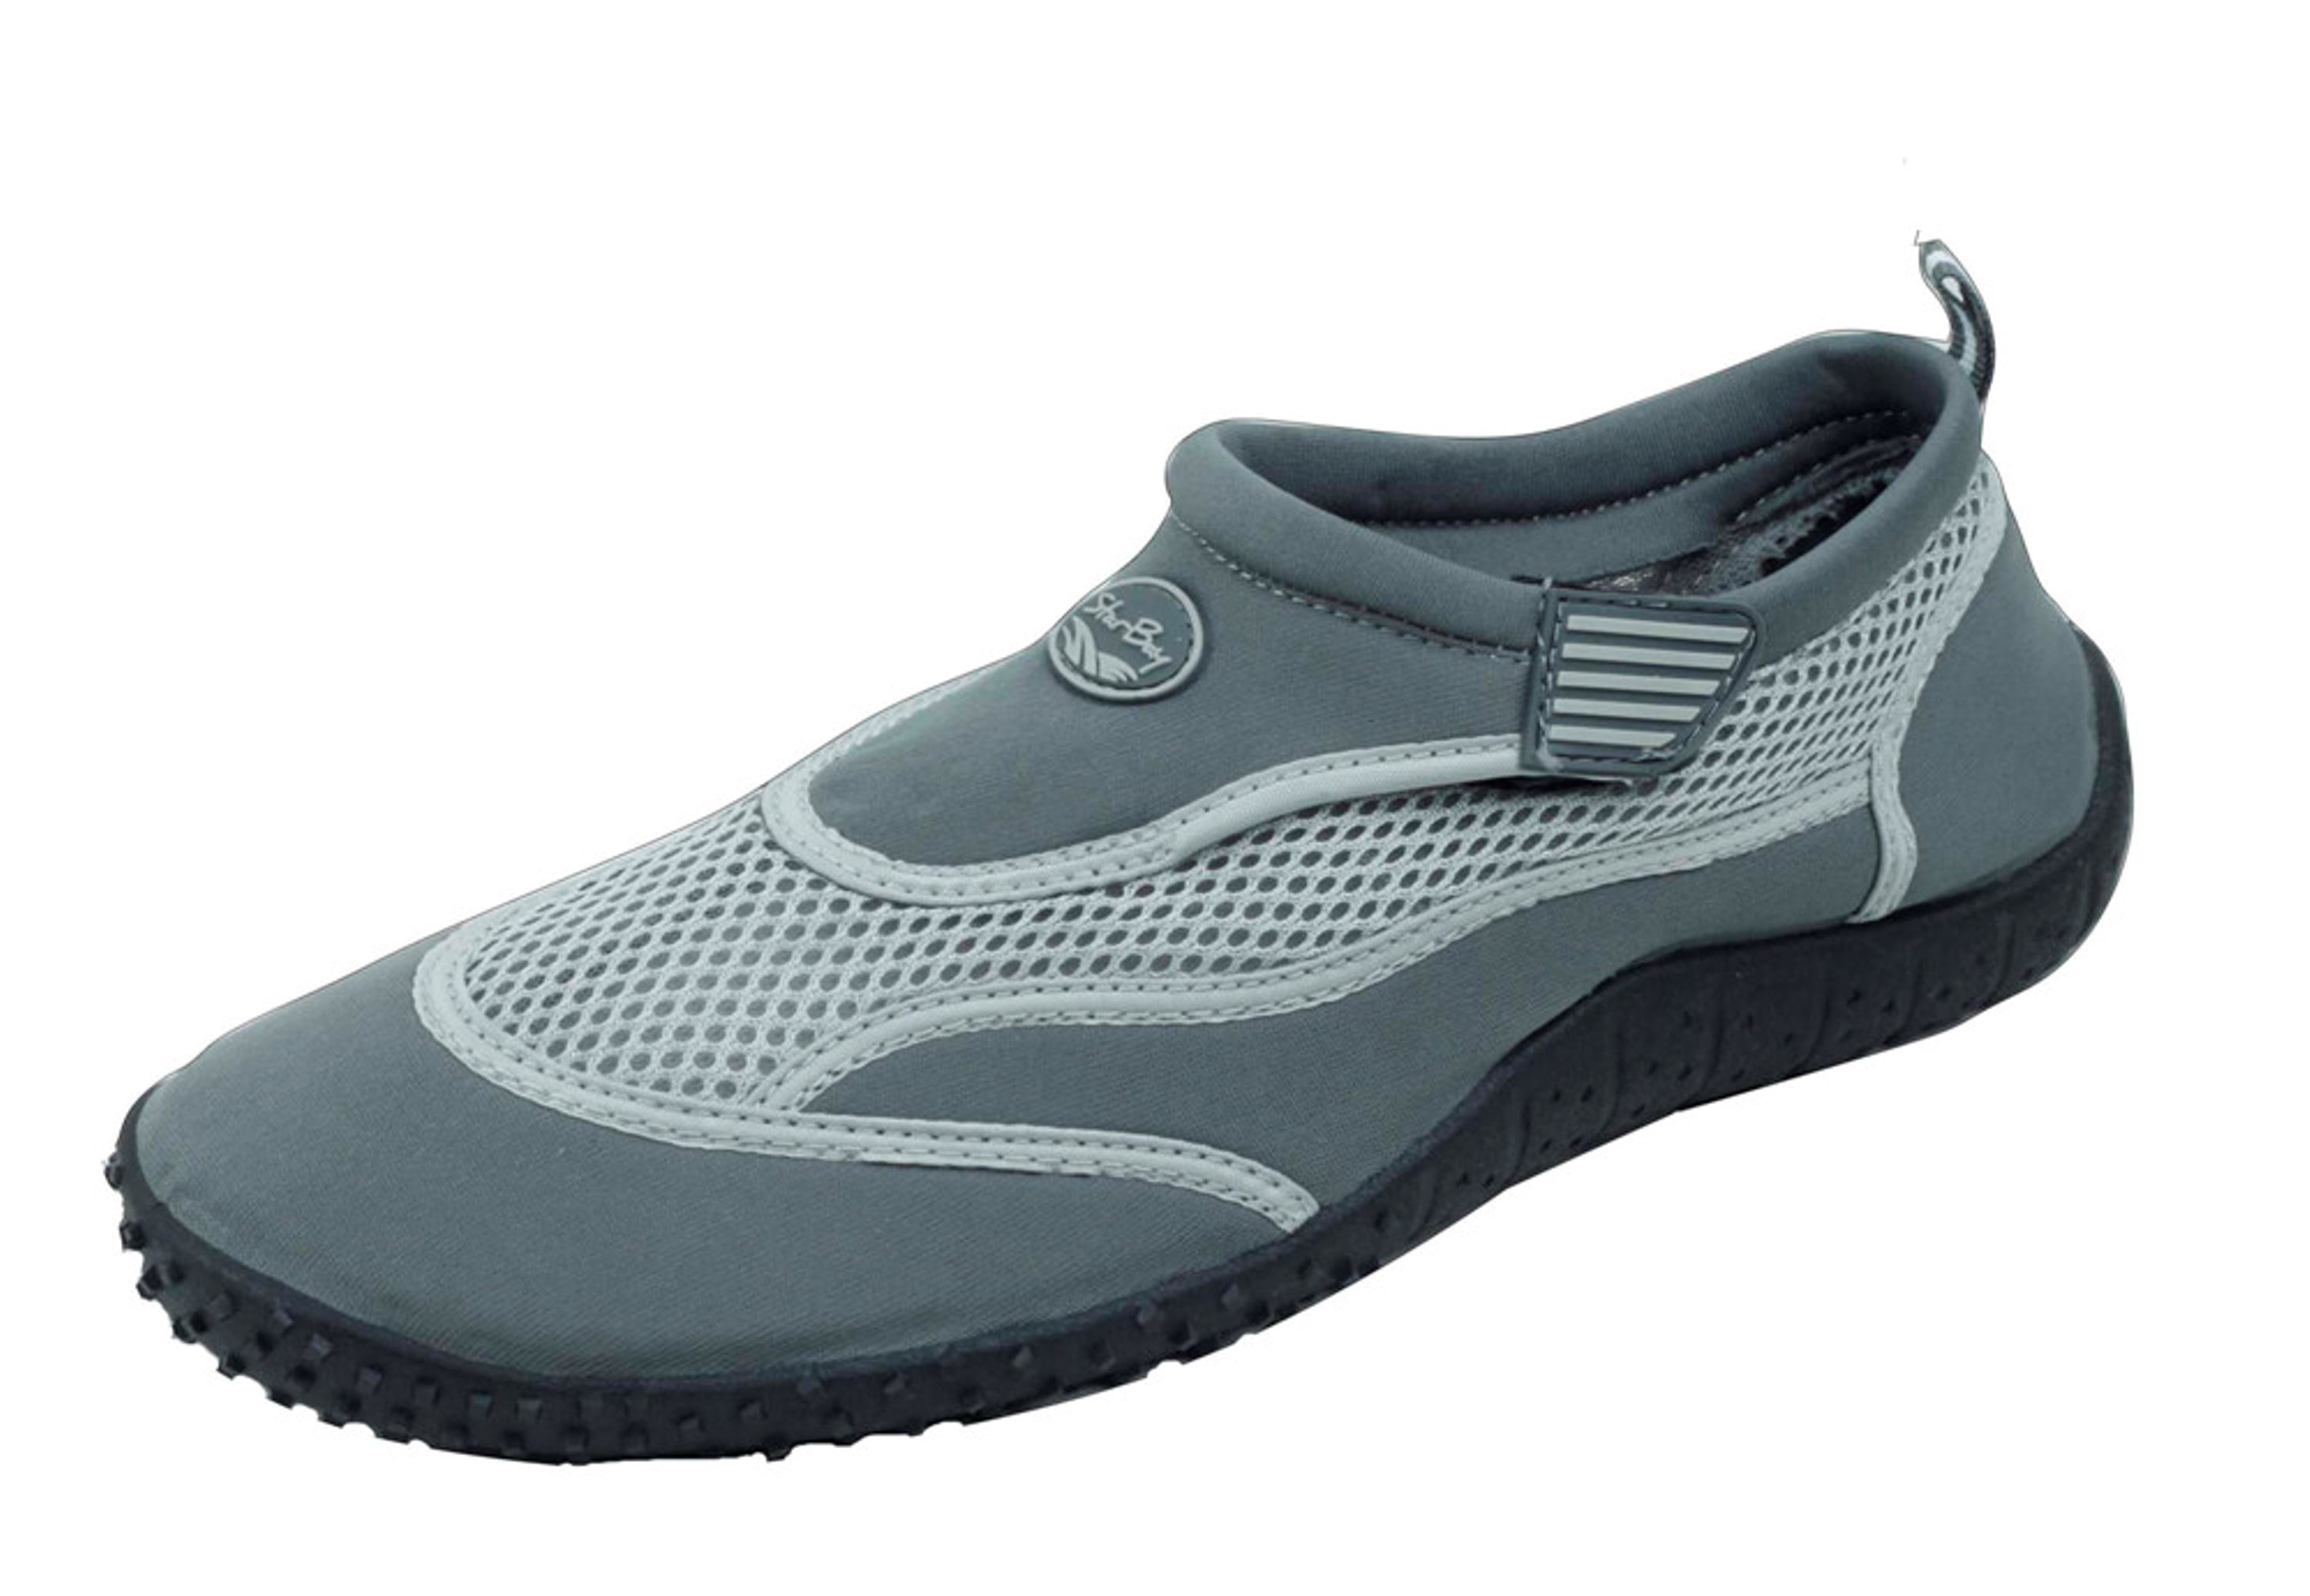 water shoes size 13 mens